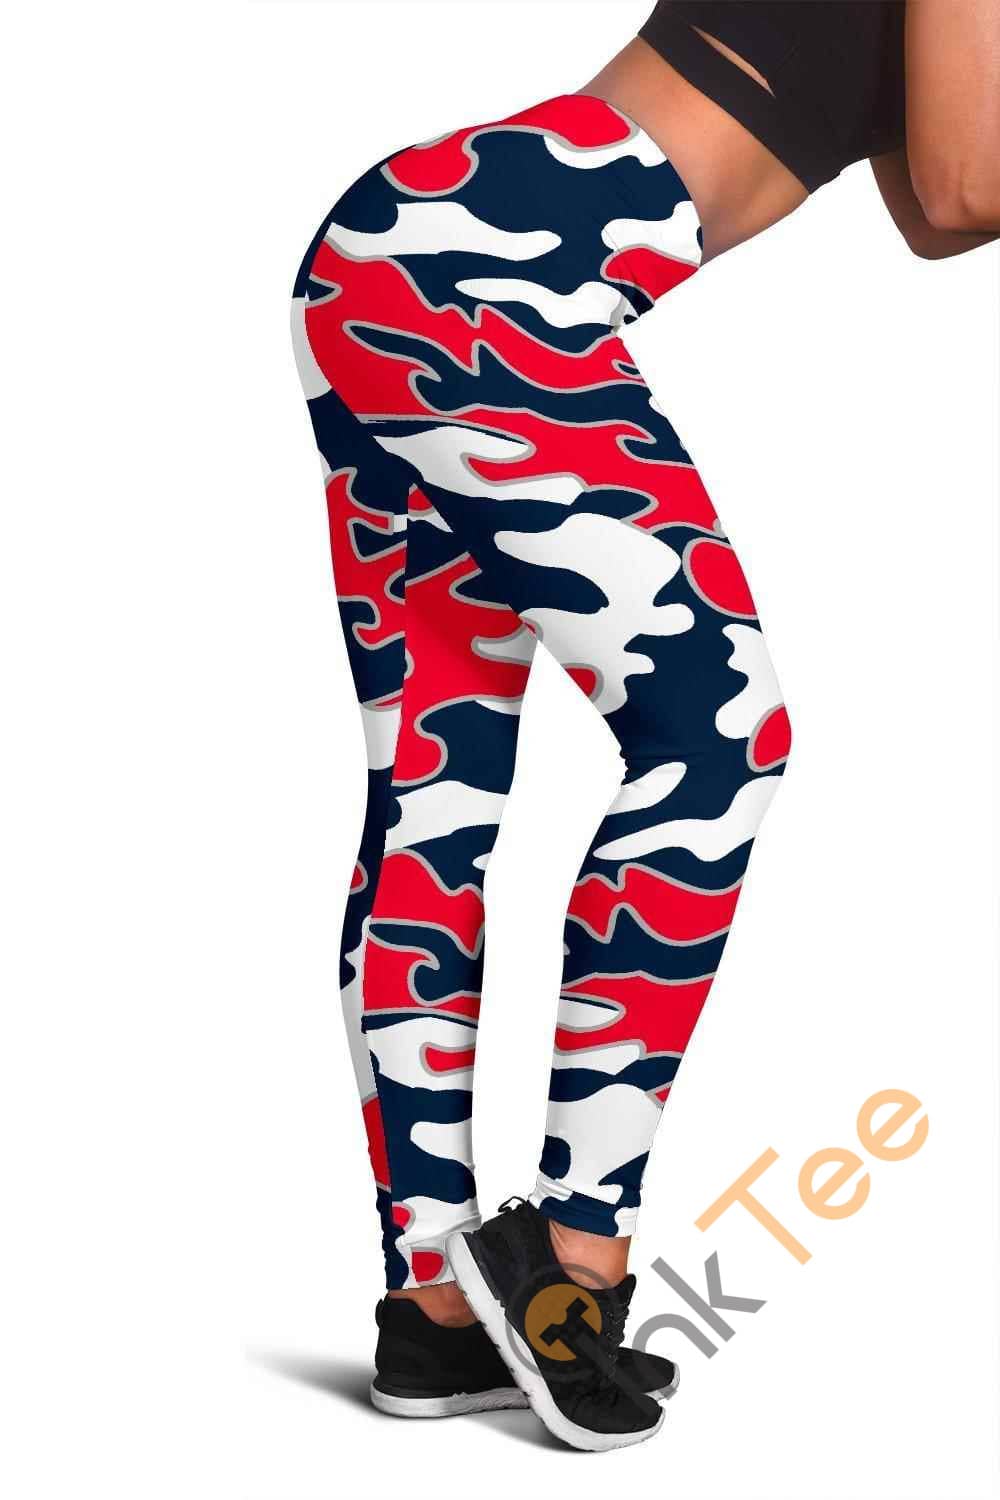 Inktee Store - Cleveland Indians Inspired Tru Camo 3D All Over Print For Yoga Fitness Fashion Women'S Leggings Image